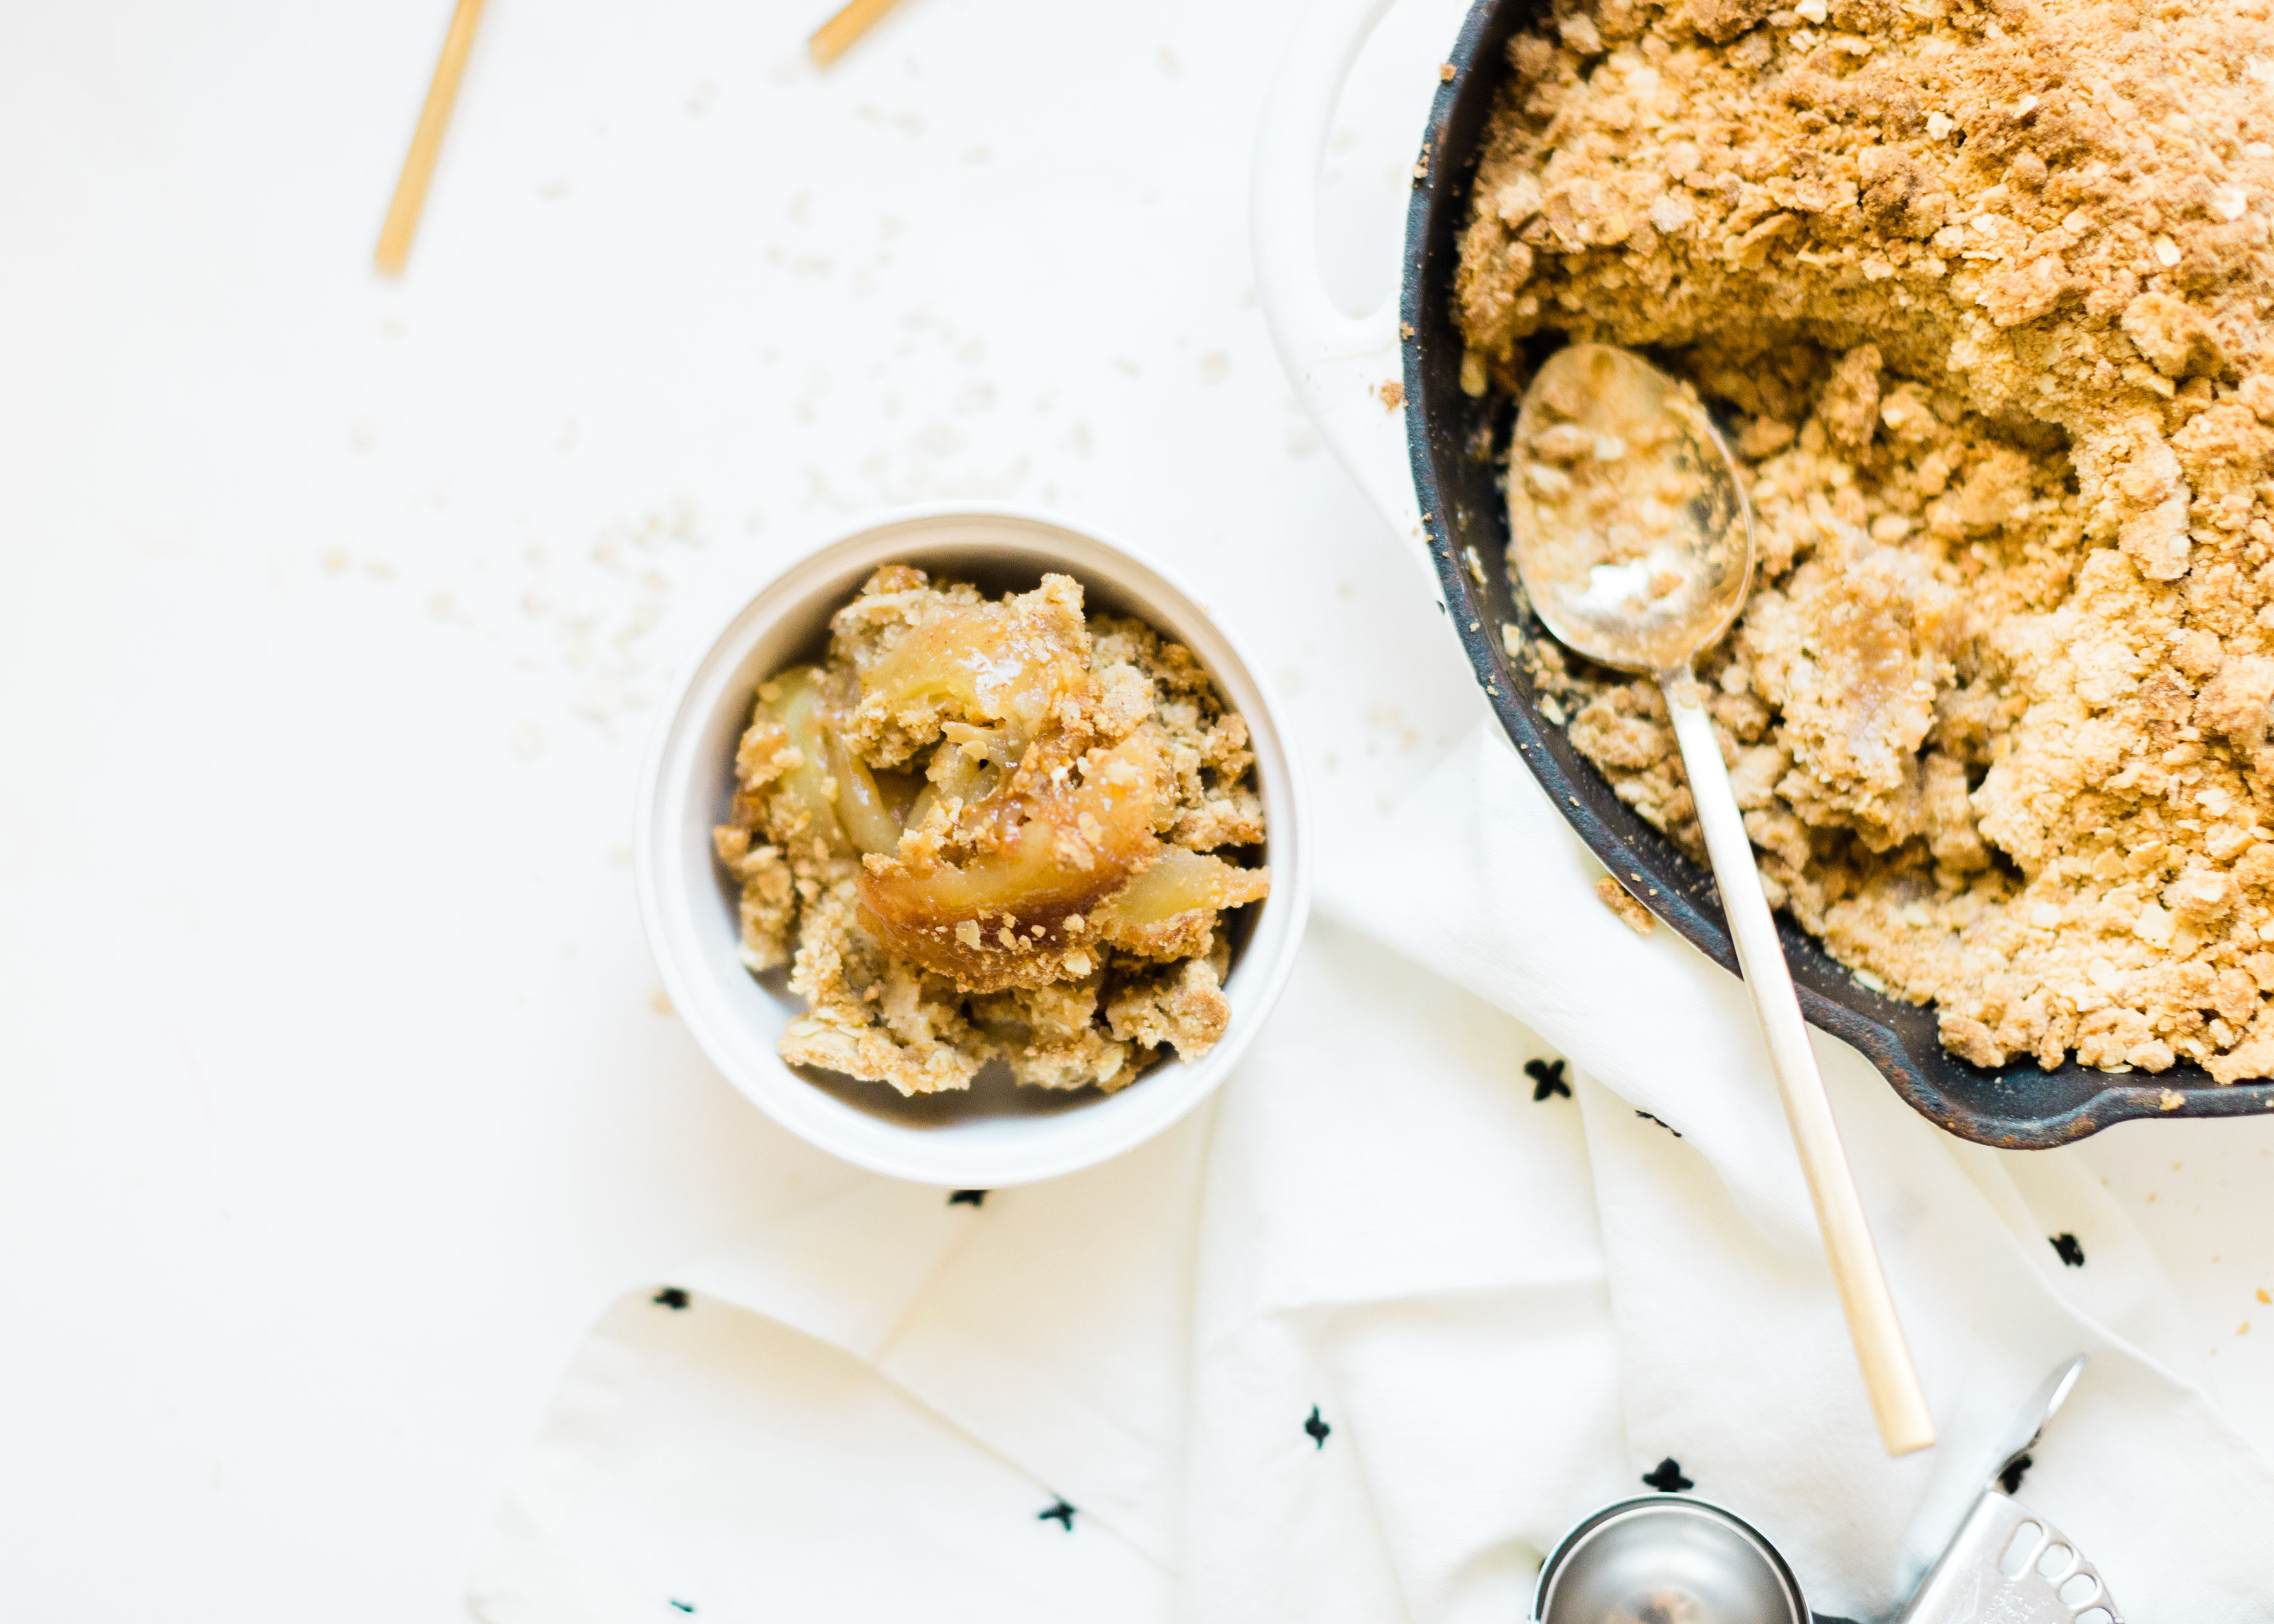 This amazing skillet apple crumble is filled with juicy apples baked into sticky, caramel-y, gooey perfection, and topped with a buttery crisp meets crumble topping that is decadently crumbly, a little bit doughy, with plenty of crunch. 